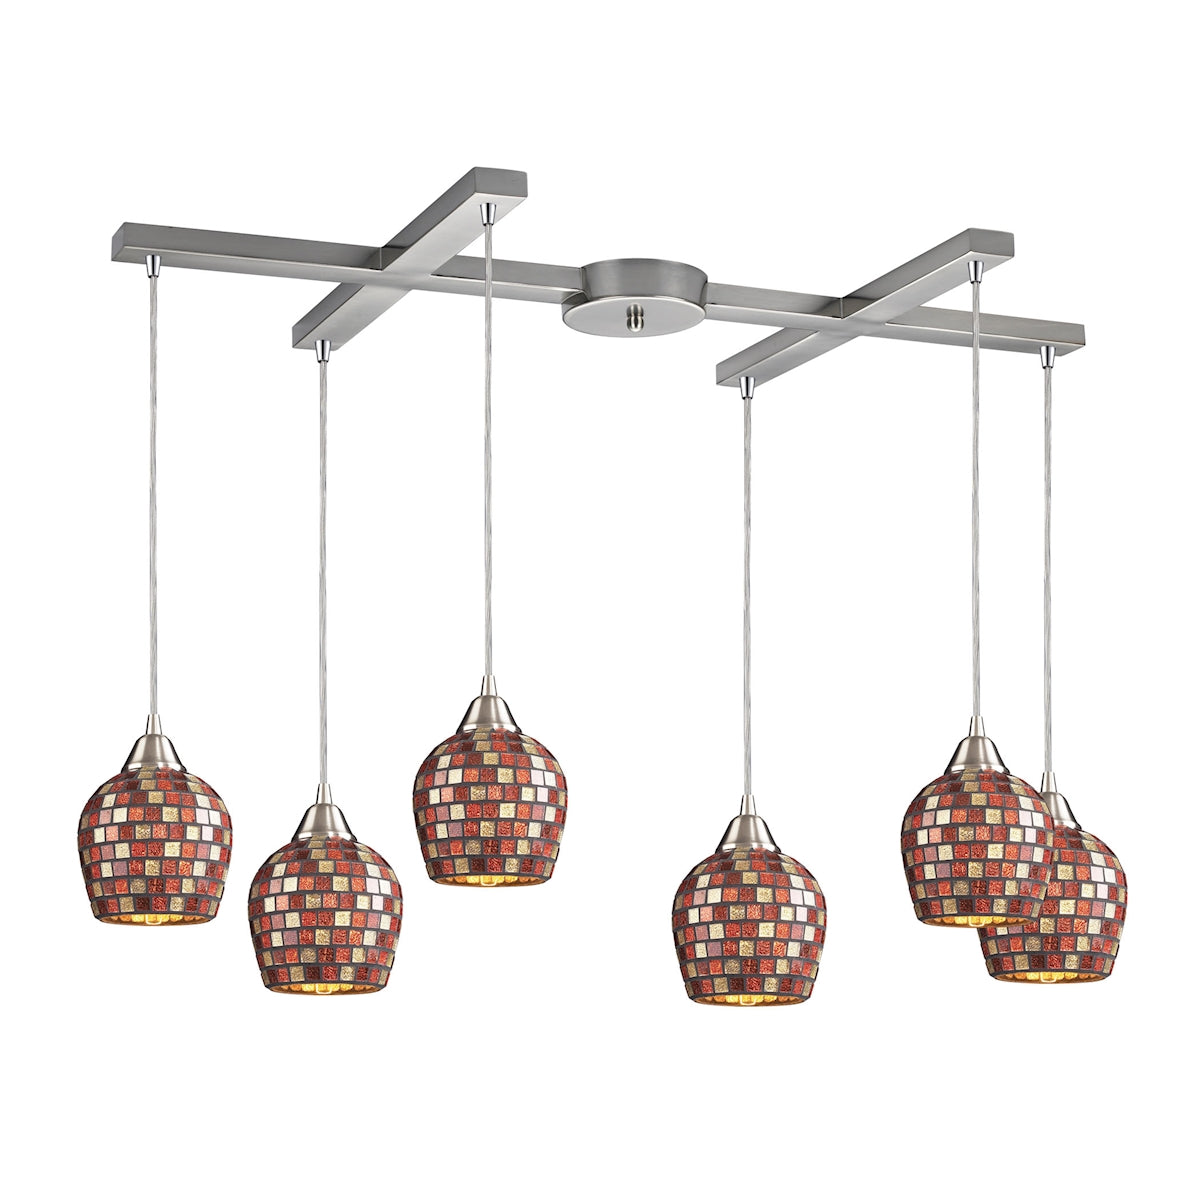 ELK Lighting 528-6MLT Fusion 6-Light H-Bar Pendant Fixture in Satin Nickel with Multi-colored Mosaic Glass